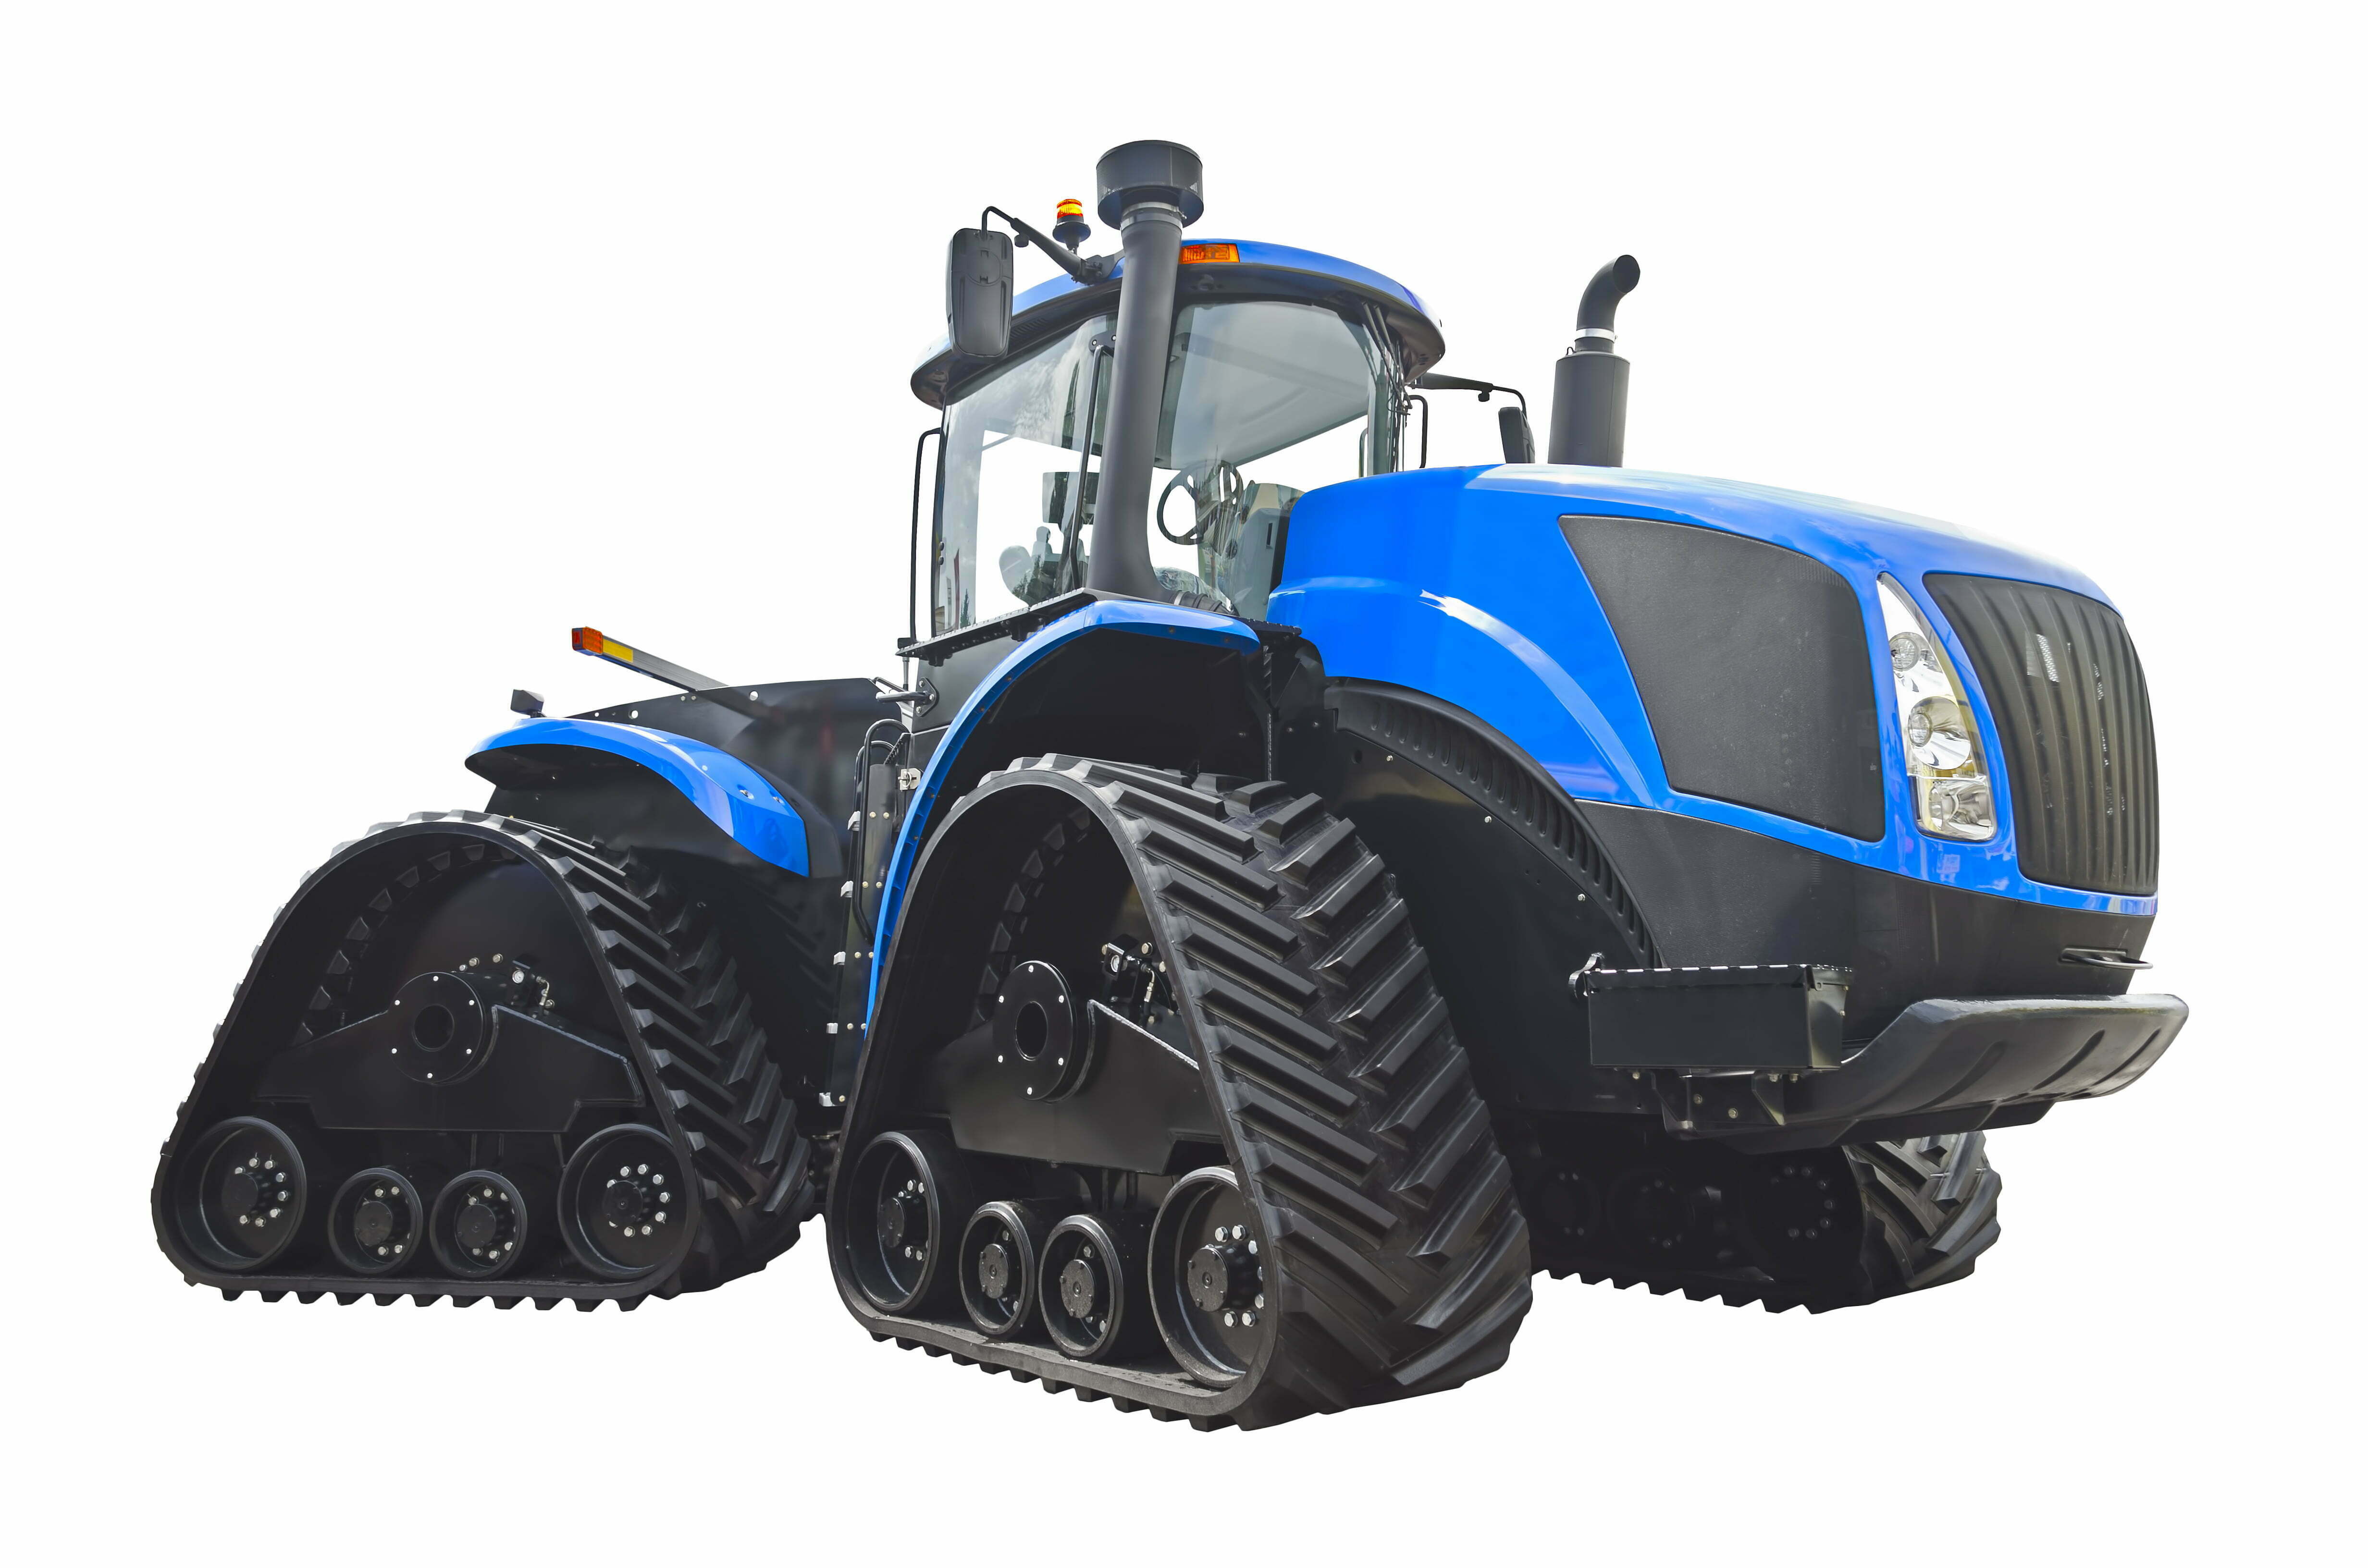 Tractor oruga New Holland